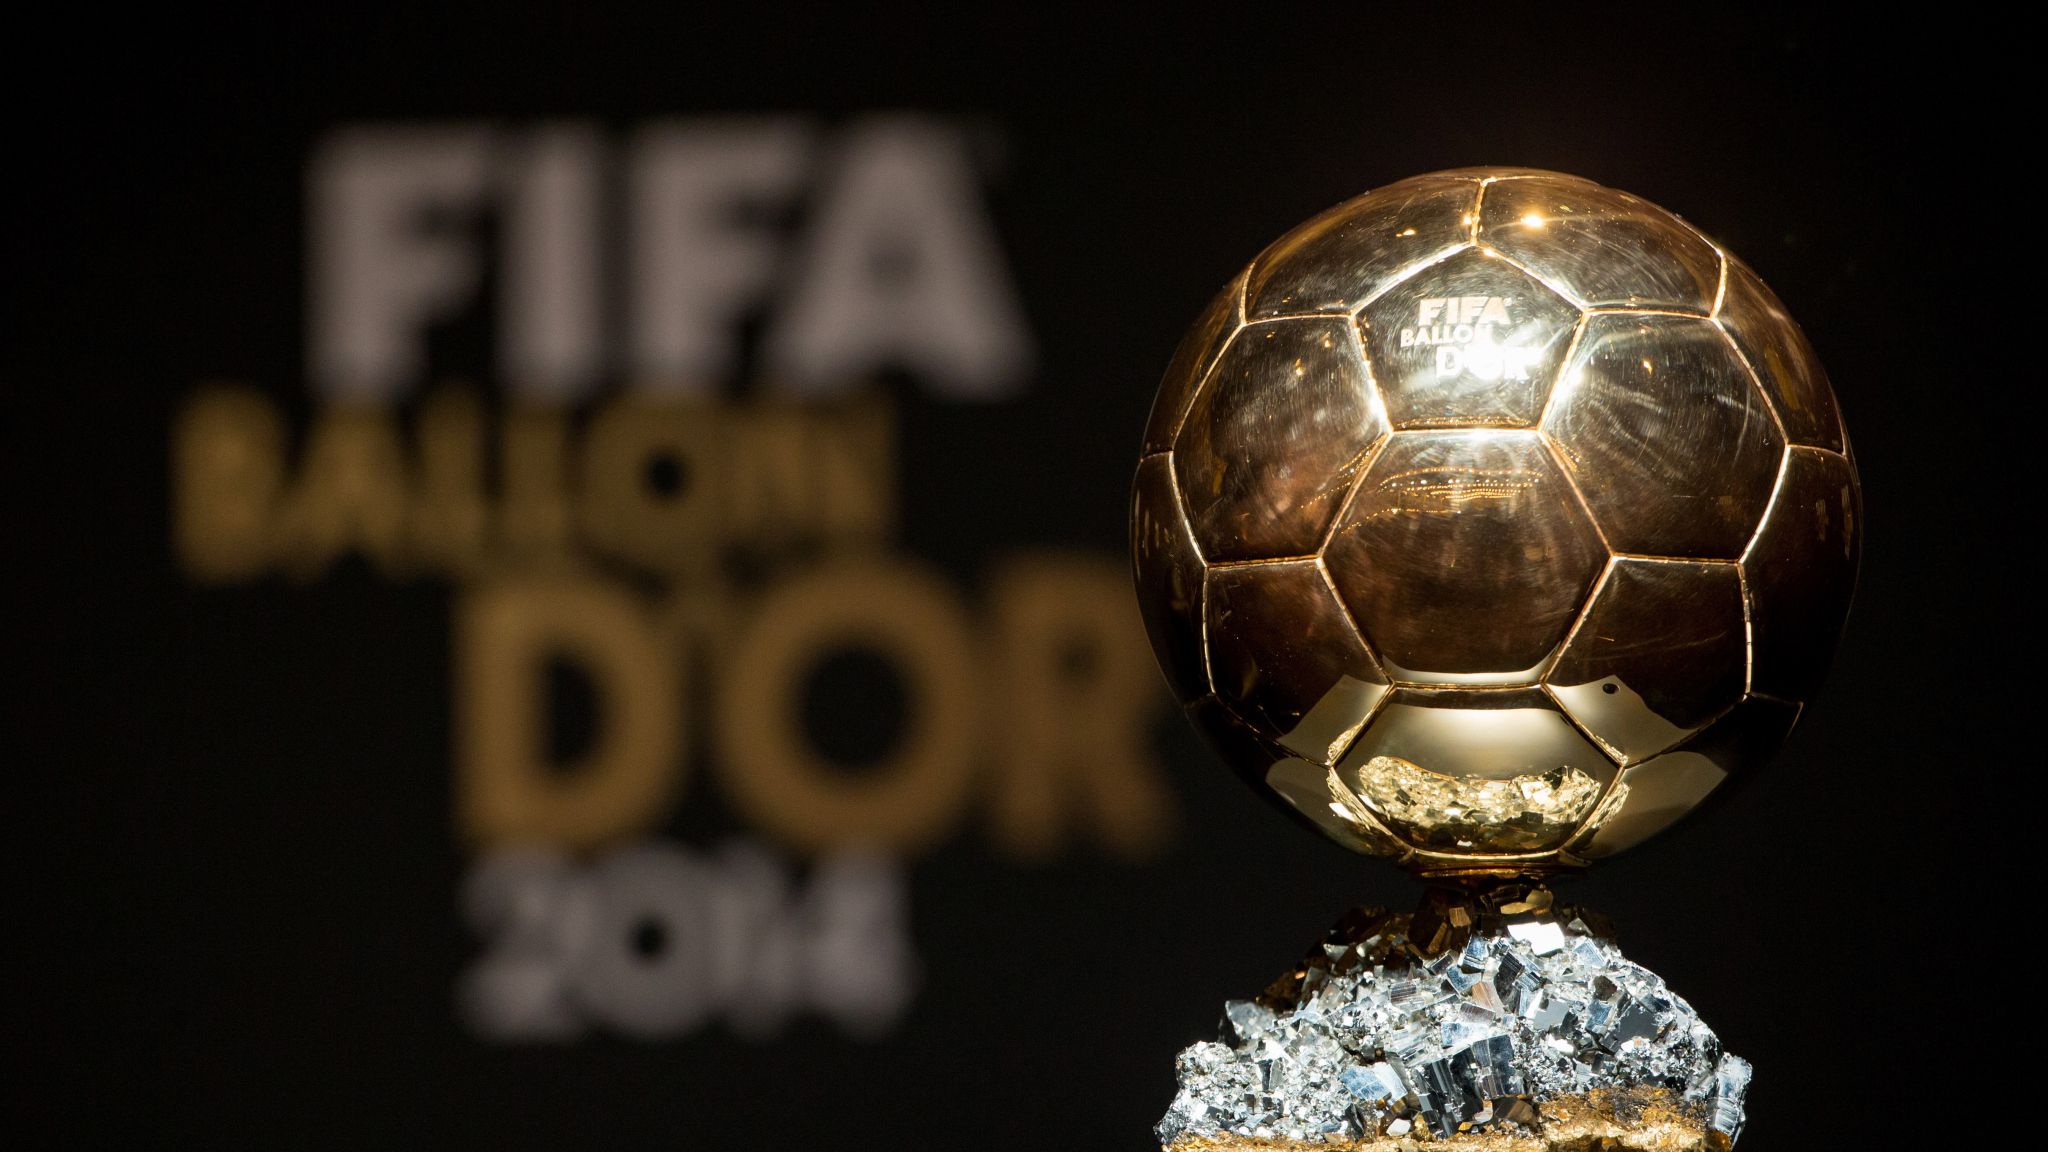 Cristiano Ronaldo wins Ballon dOr Find out who voted for who Football News Sky Sports